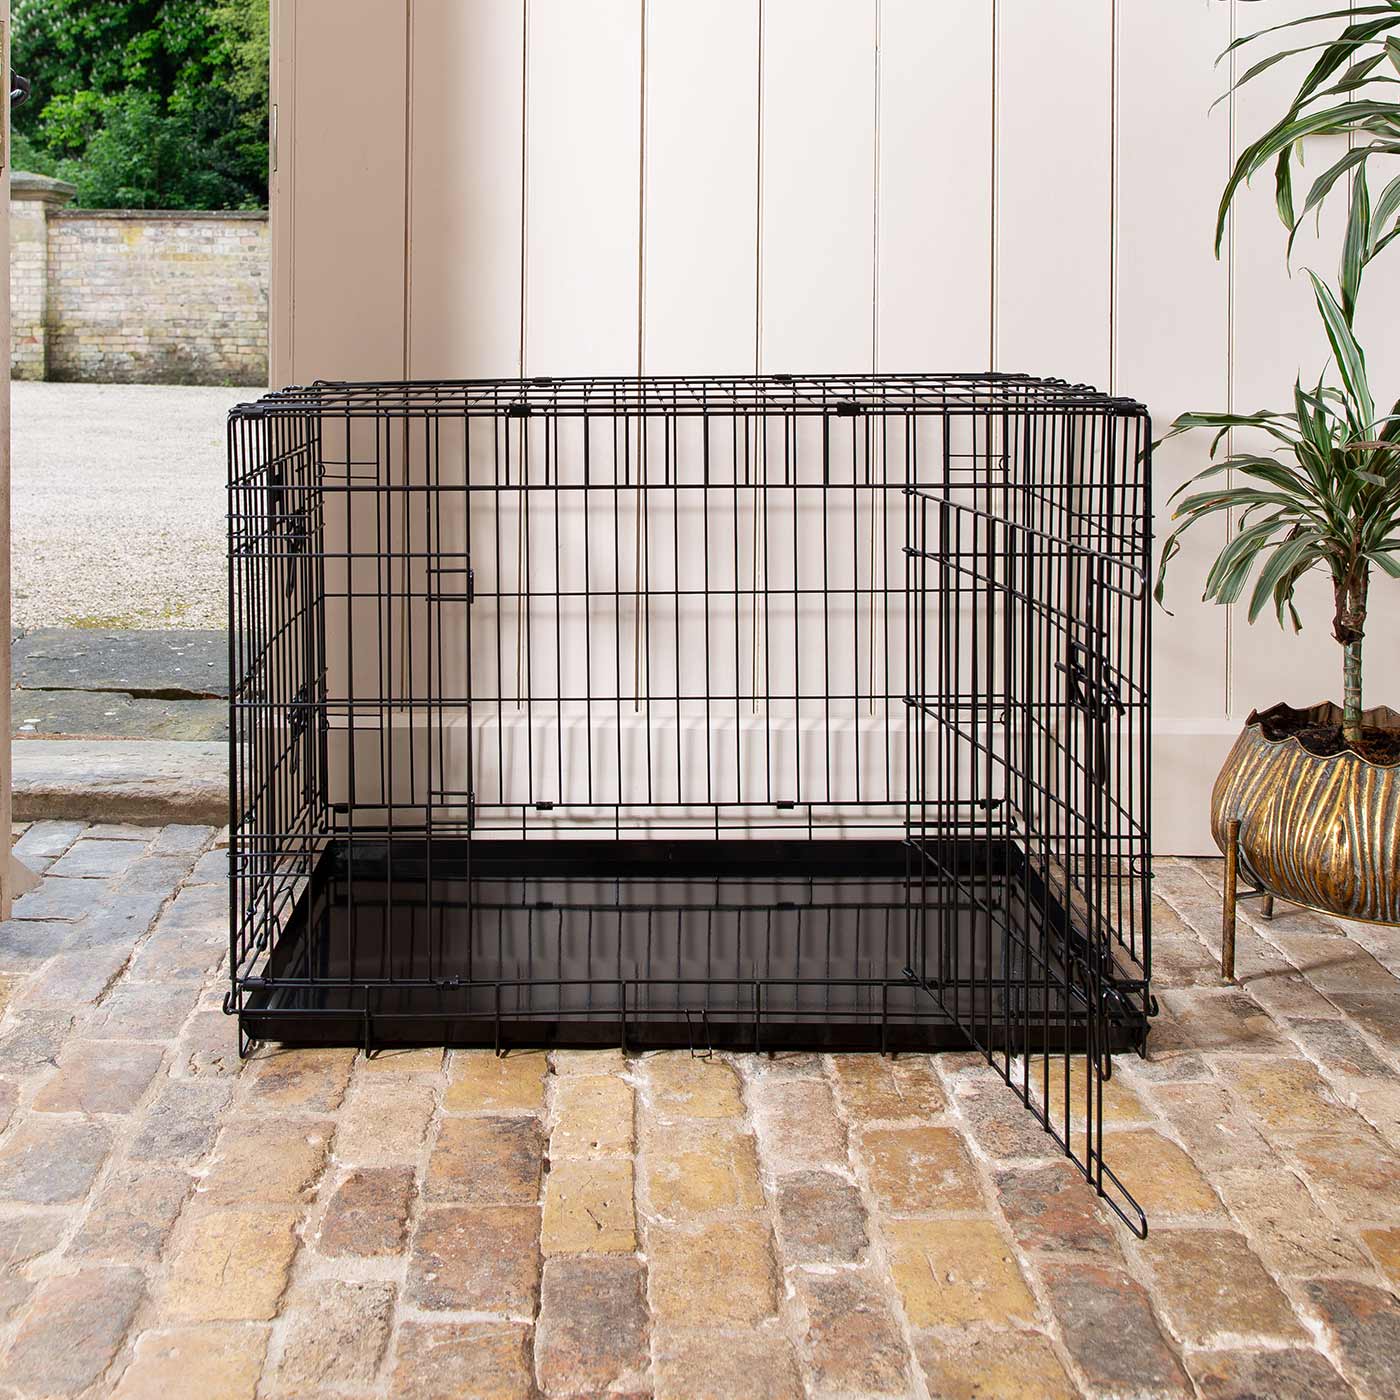 Deluxe Black Dog Cage, Dog Accessories